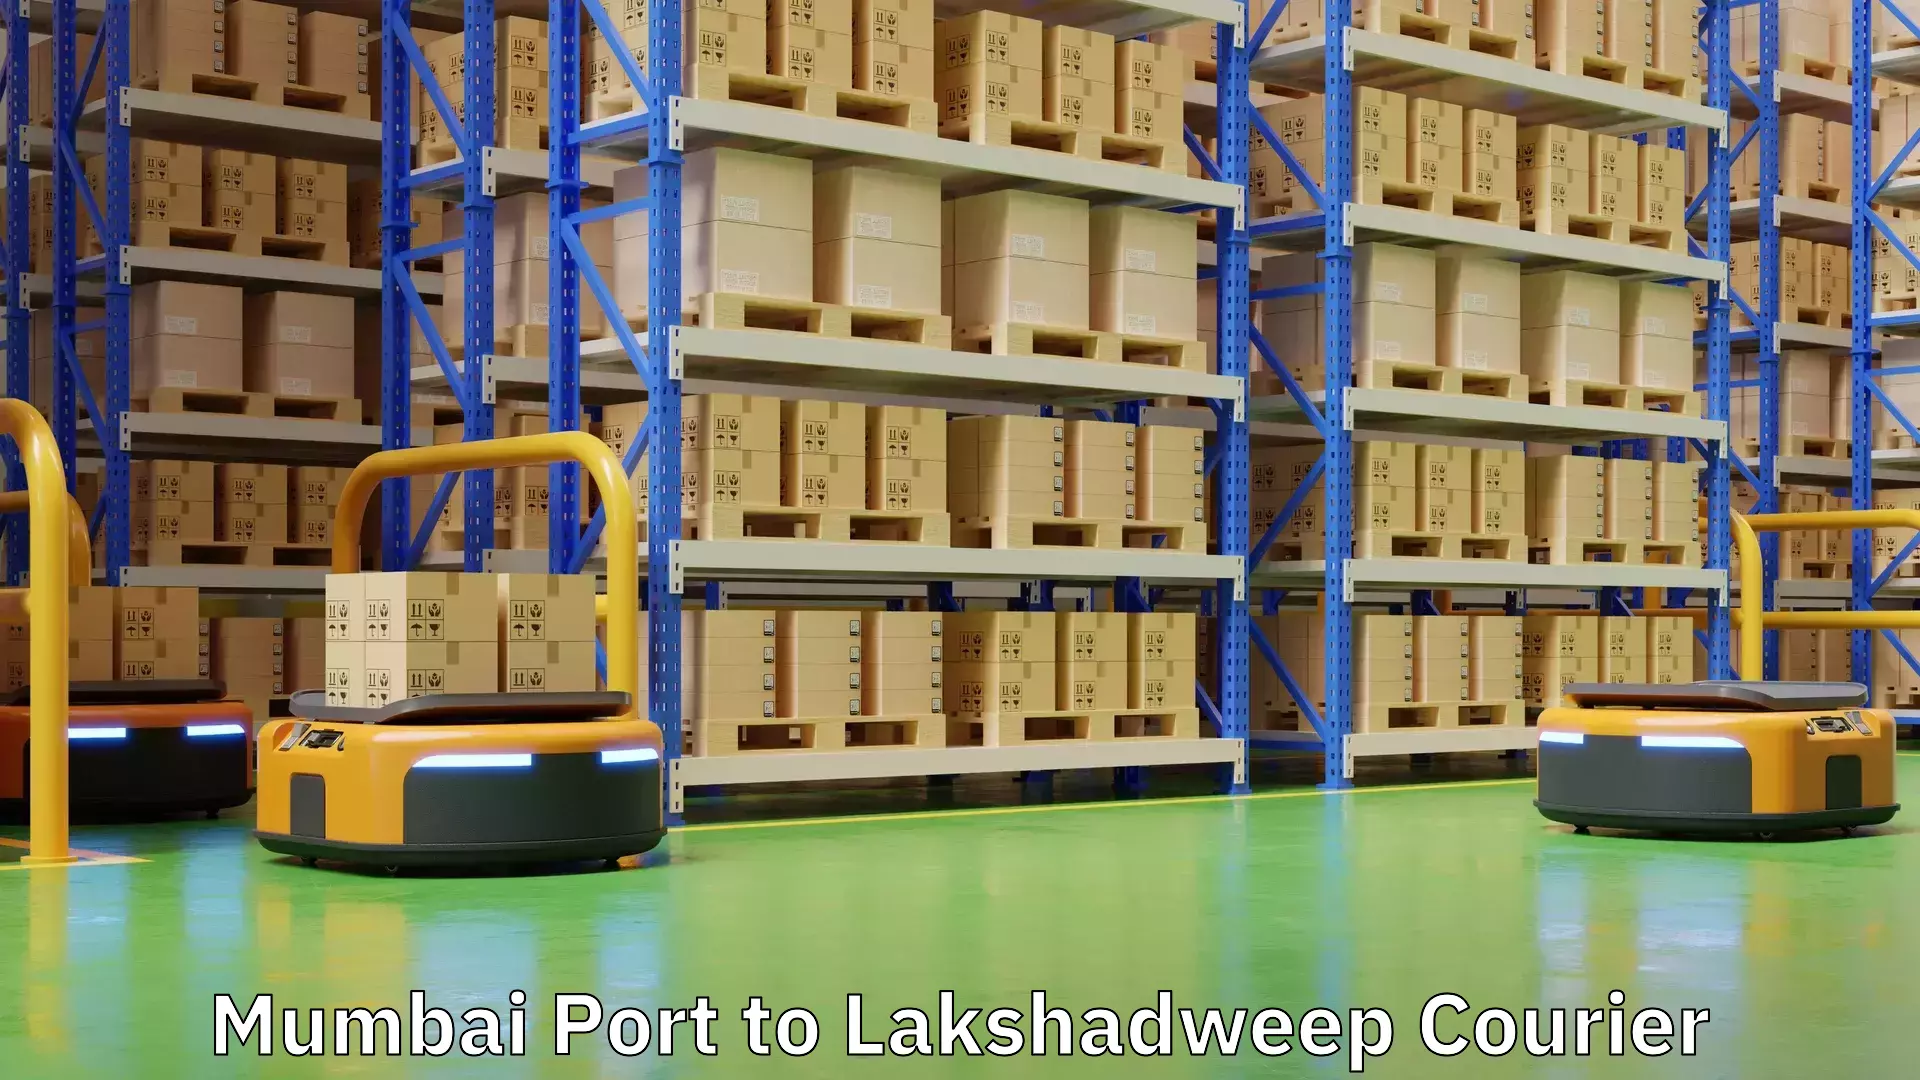 Personalized courier solutions Mumbai Port to Lakshadweep